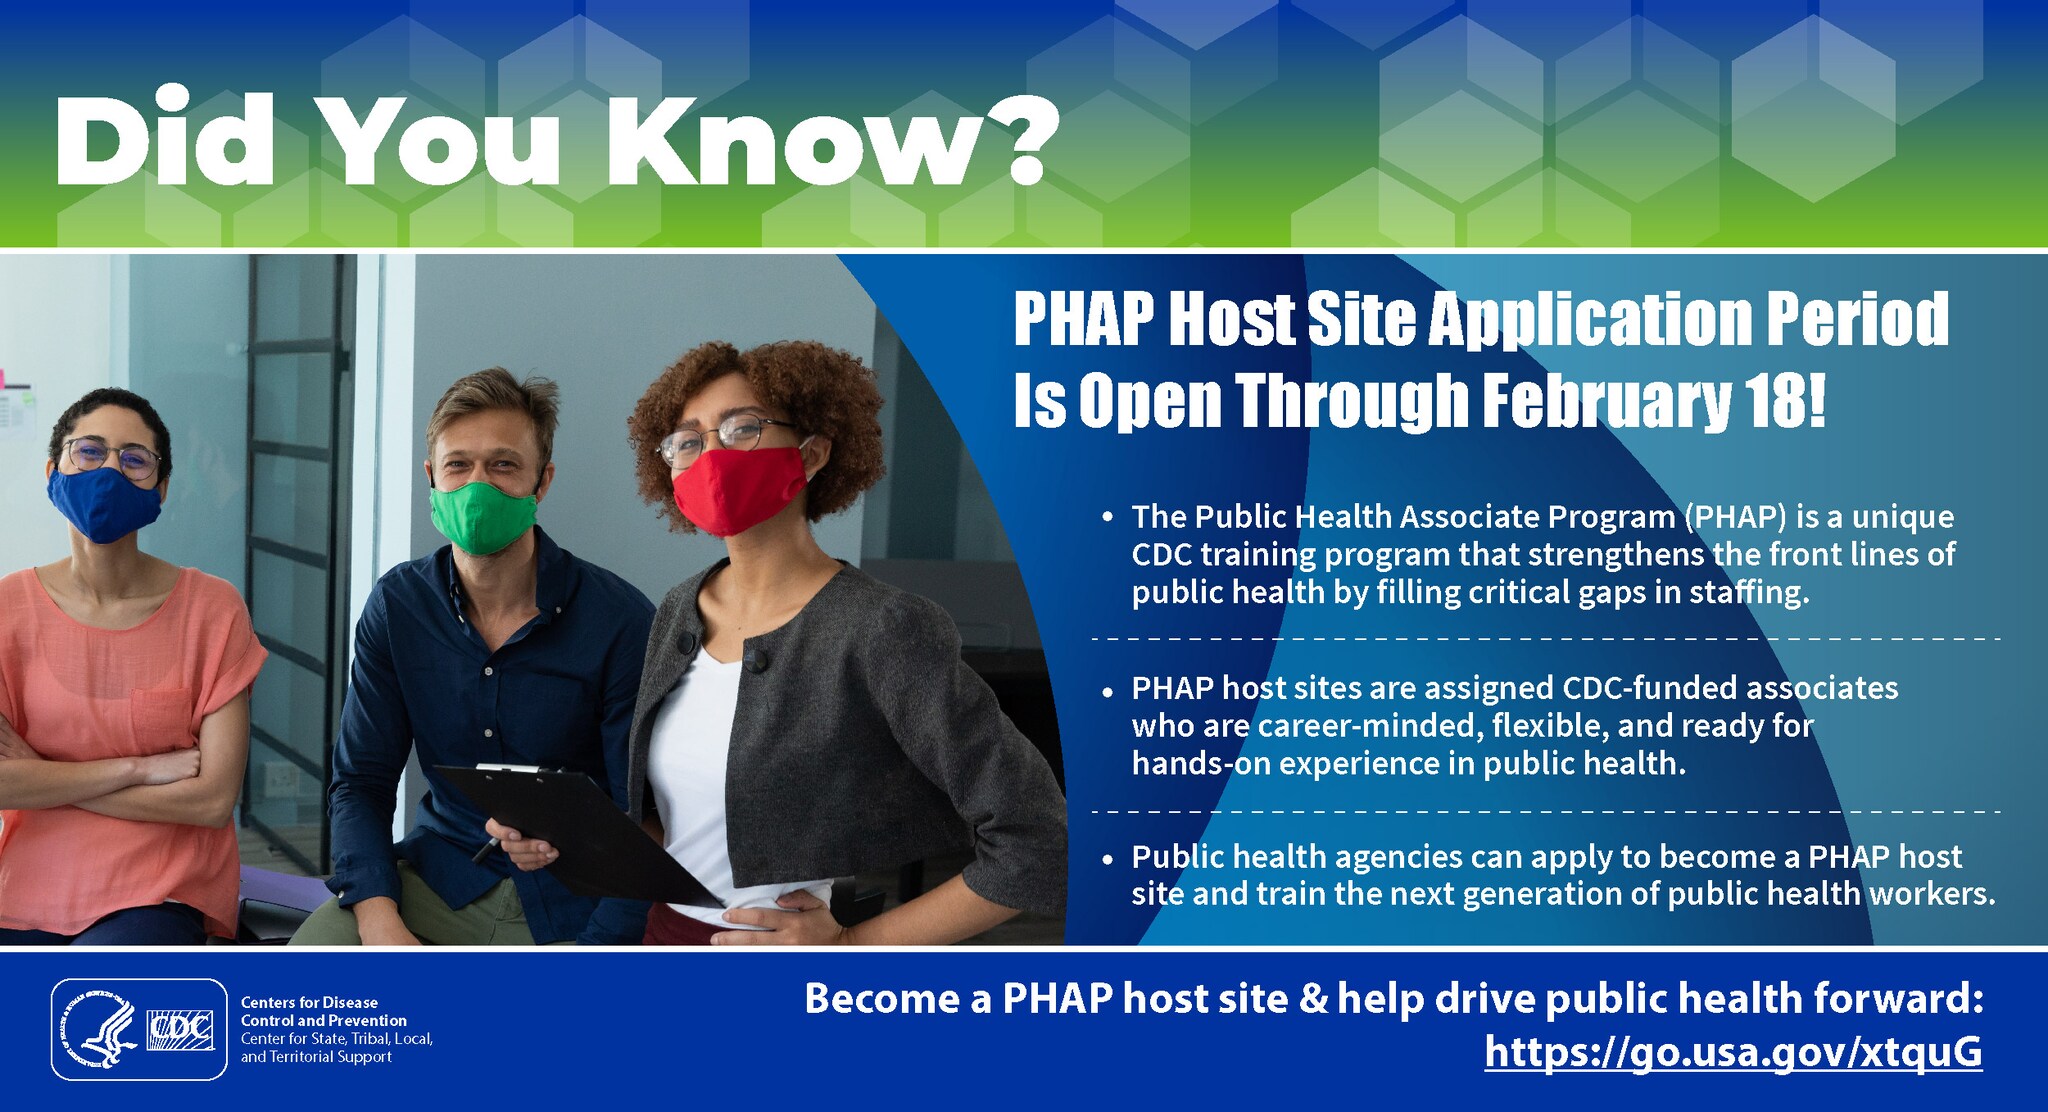 Did You Know? PHAP host site application period is open through February 18! The Public Health Associate Program (PHAP) is a unique CDC training program that strengthens the front lines of public health by filling critical gaps in staffing. PHAP host sites are assigned CDC-funded associates who are career-minded, flexible, and ready for hands-on experience in public health. Public health agencies can apply to become a PHAP host site and train the next generation of public health workers. Become a PHAP host site & help drive public health forward: https://go.usa.gov/xtquG